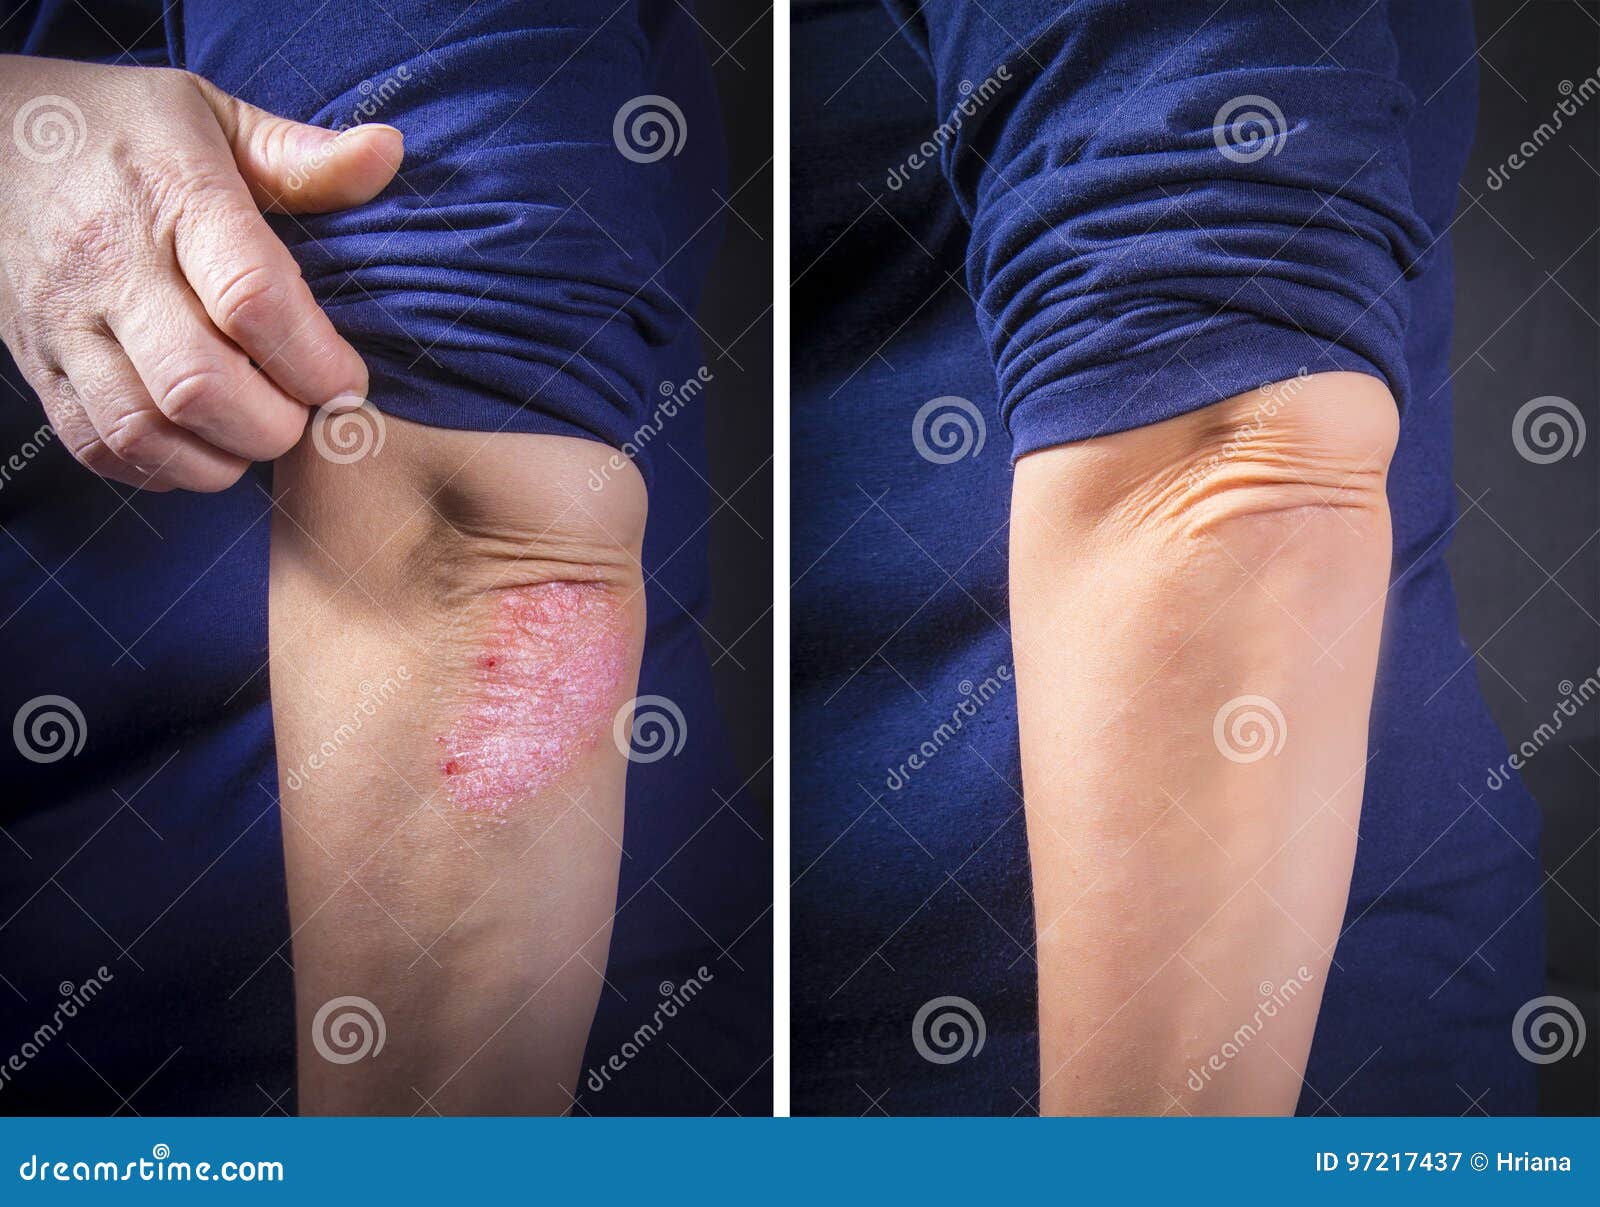 psoriasis on elbow before and after